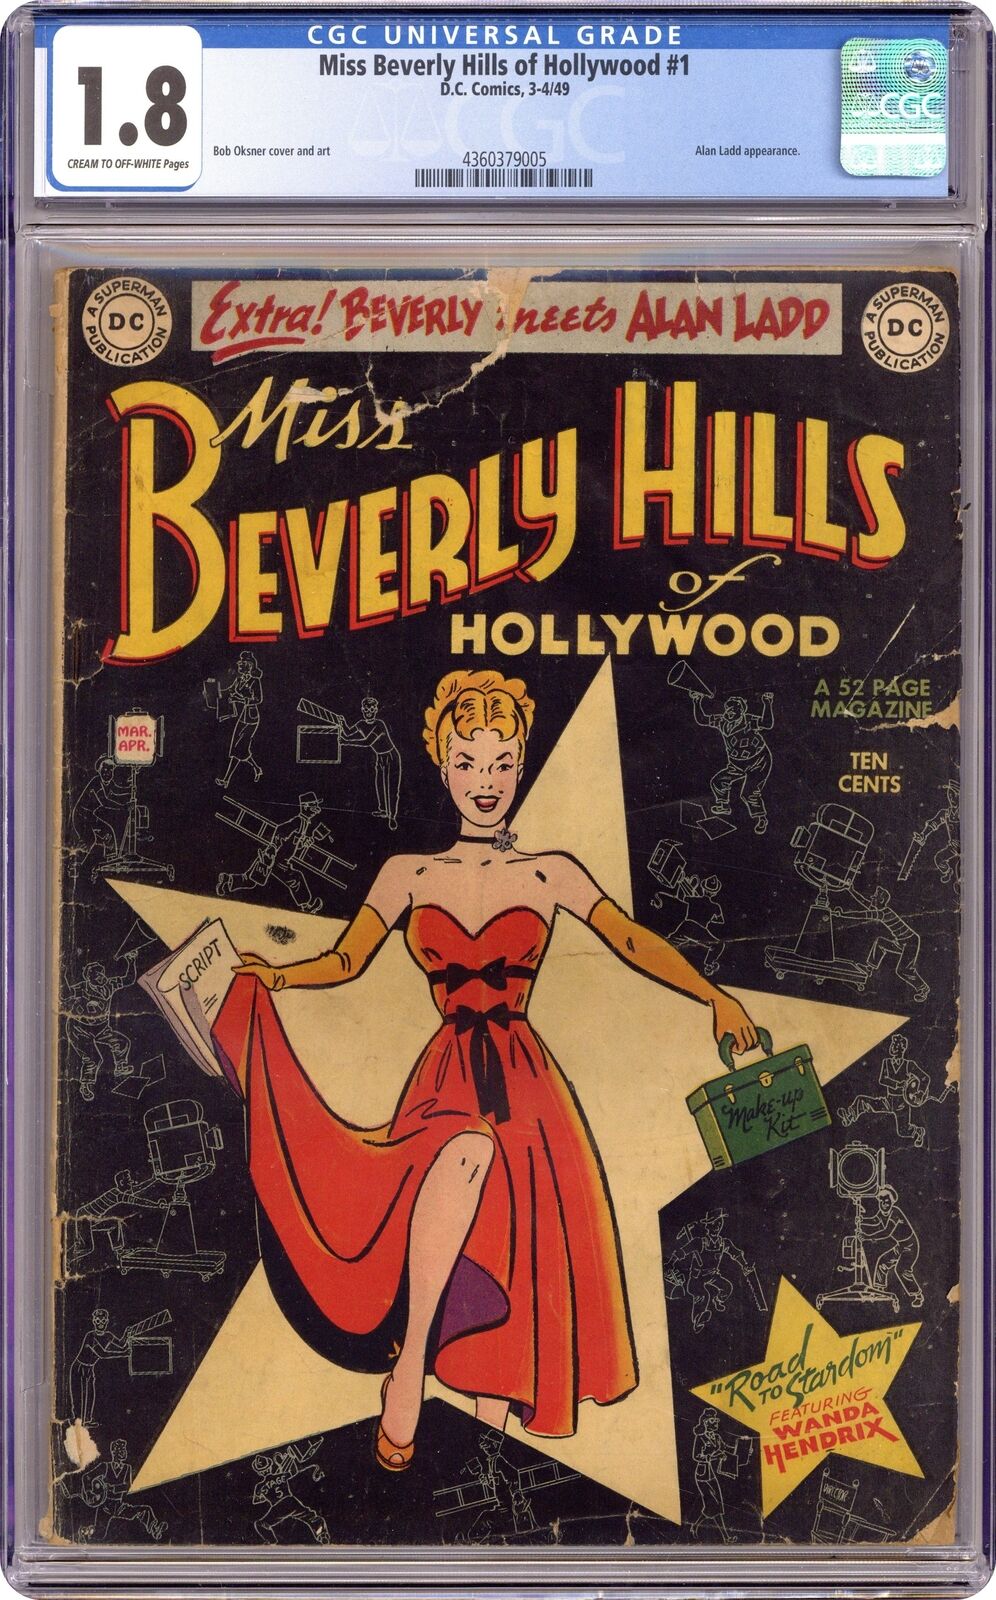 Miss Beverly Hills of Hollywood #1 CGC 1.8 1949 4360379005